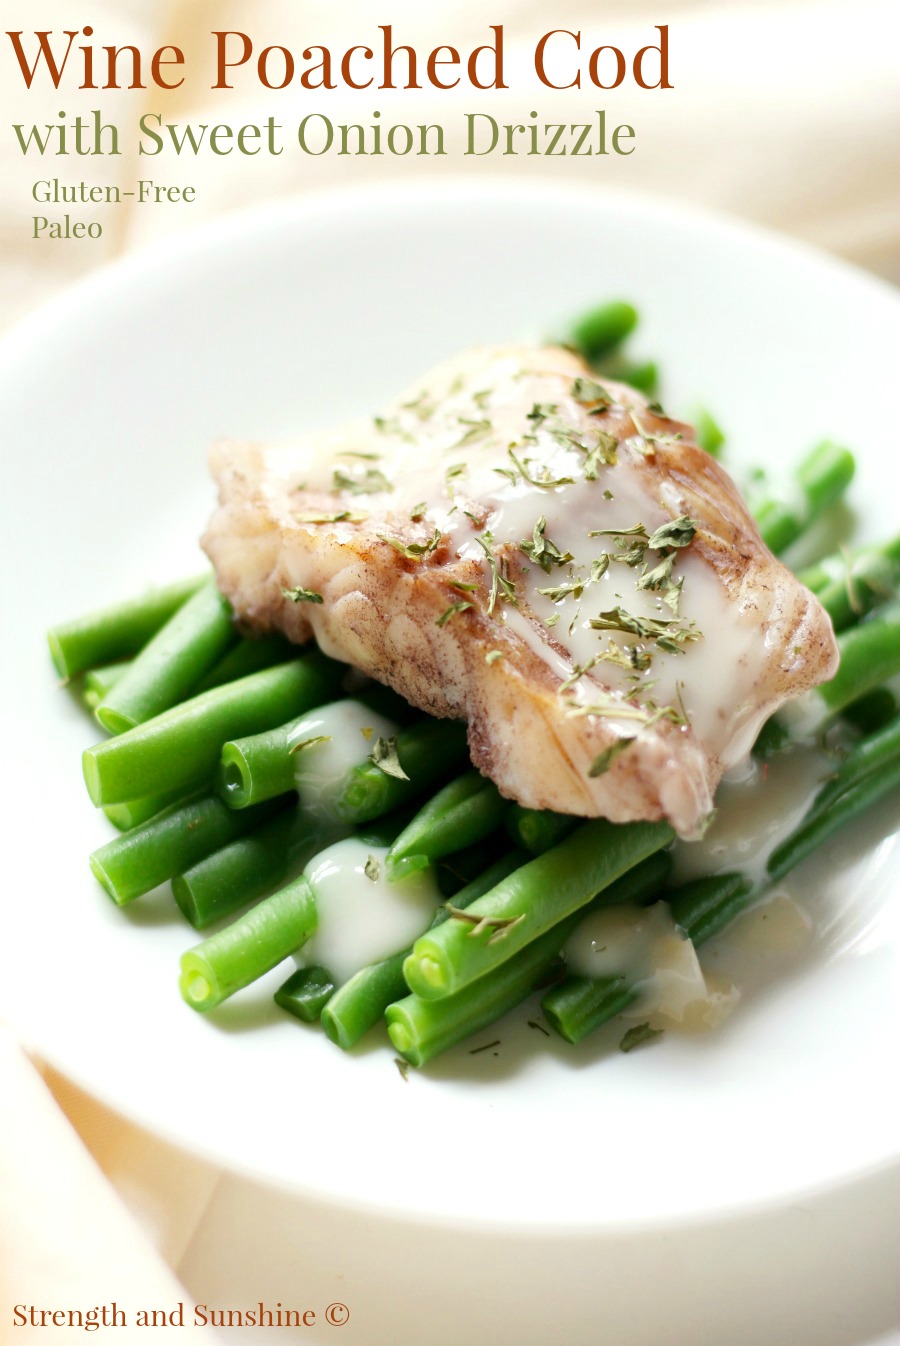 Wine Poached Cod with Sweet Onion Drizzle | Strength and Sunshine @RebeccaGF666 Treat yourself to an easy and elegant dinner of Wine Poached Cod with Sweet Onion Drizzle. This recipe is gluten-free, dairy-free, egg-free, nut-free, paleo, and perfect for a luxurious date night without all the fuss!